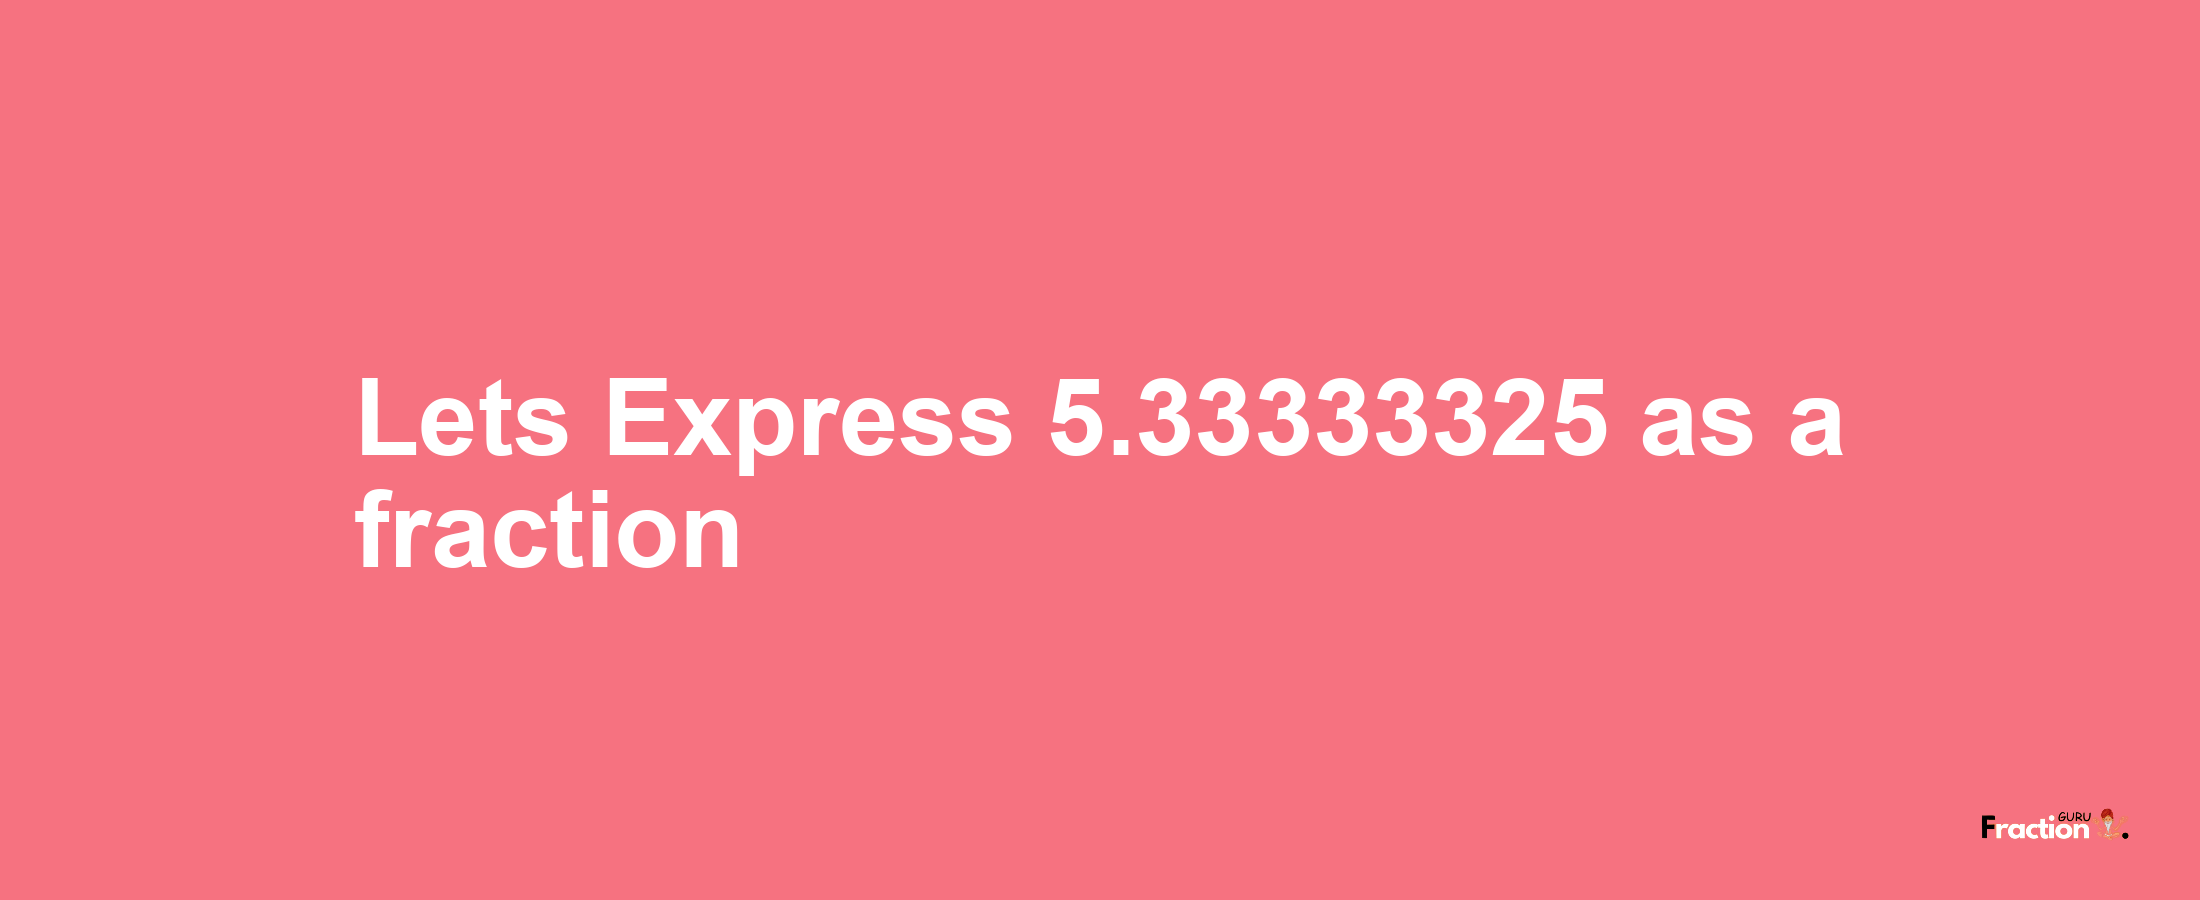 Lets Express 5.33333325 as afraction